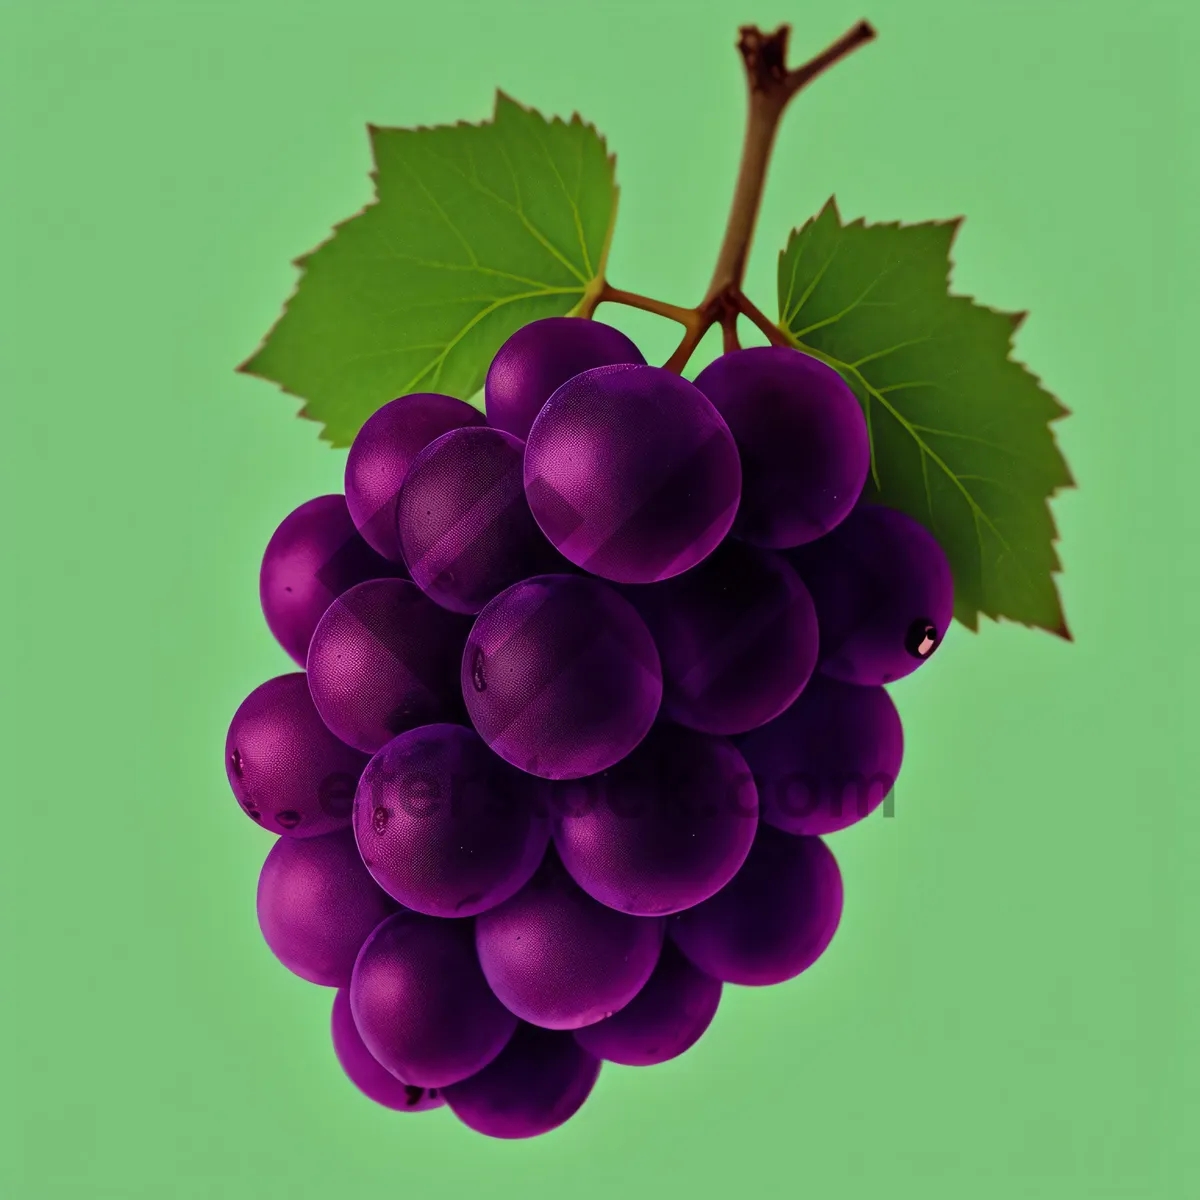 Picture of Ripe Juicy Grape Bunch on Vine